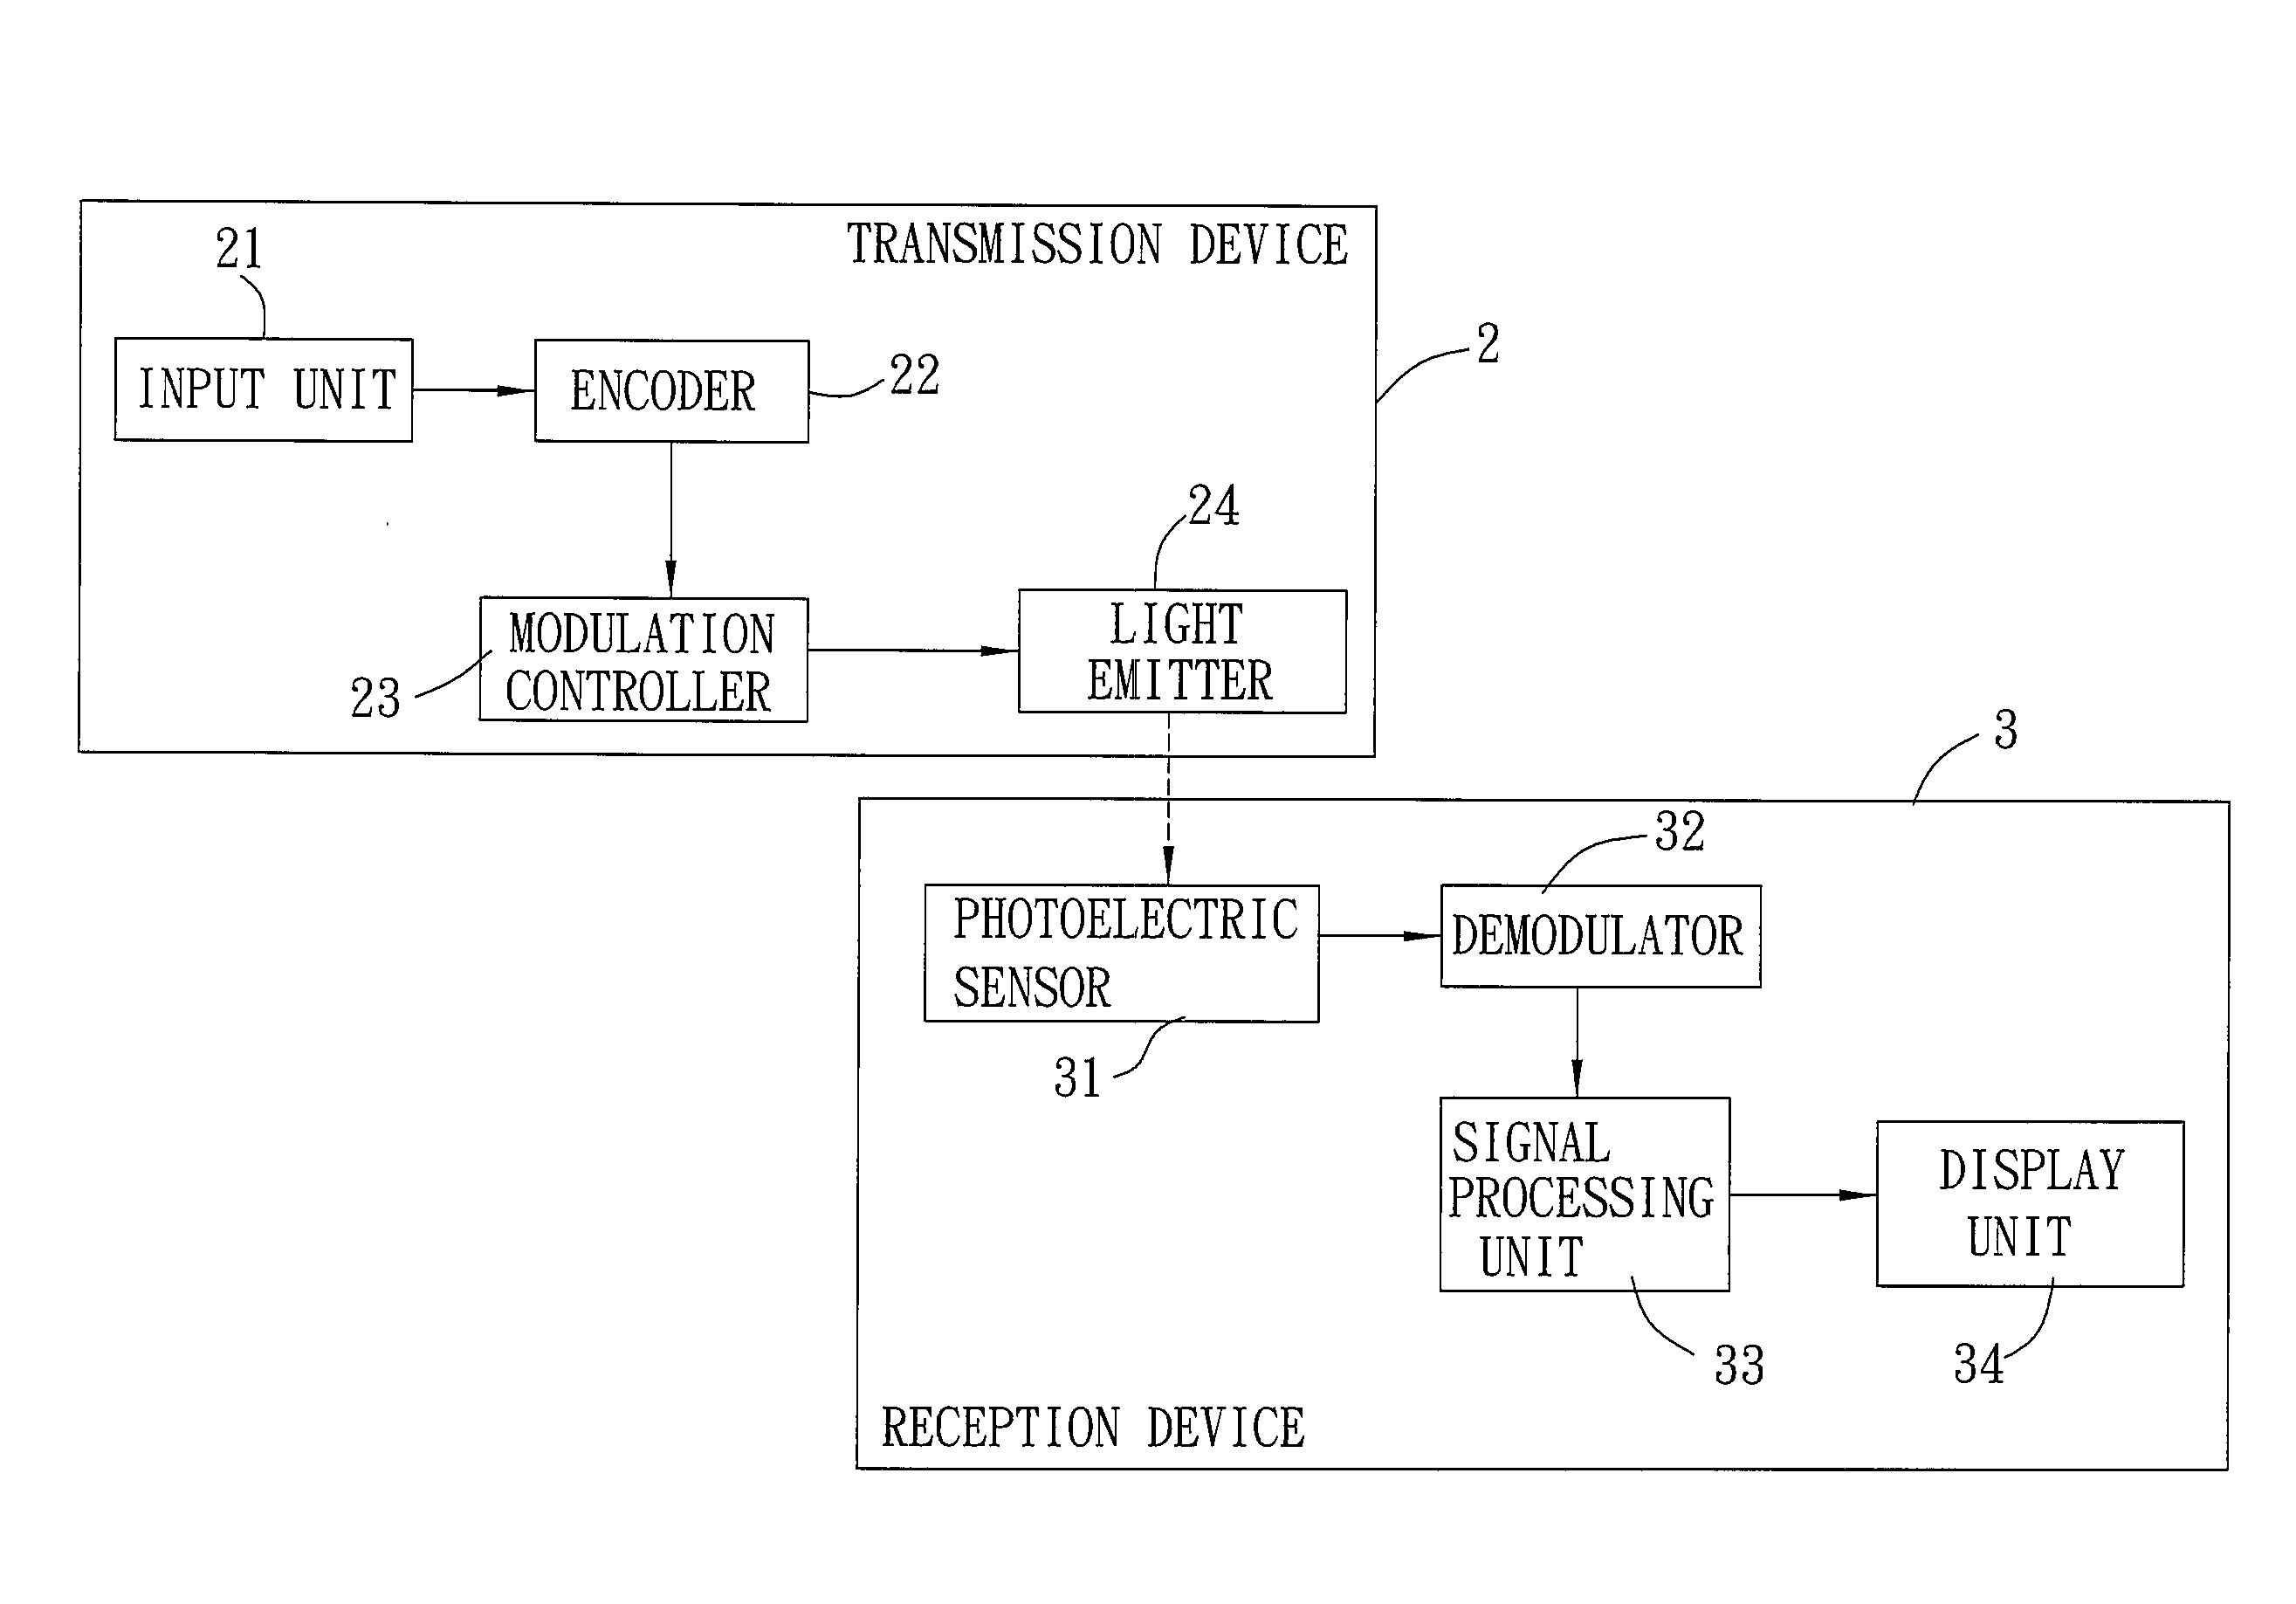 Real-time information transmission and reception system